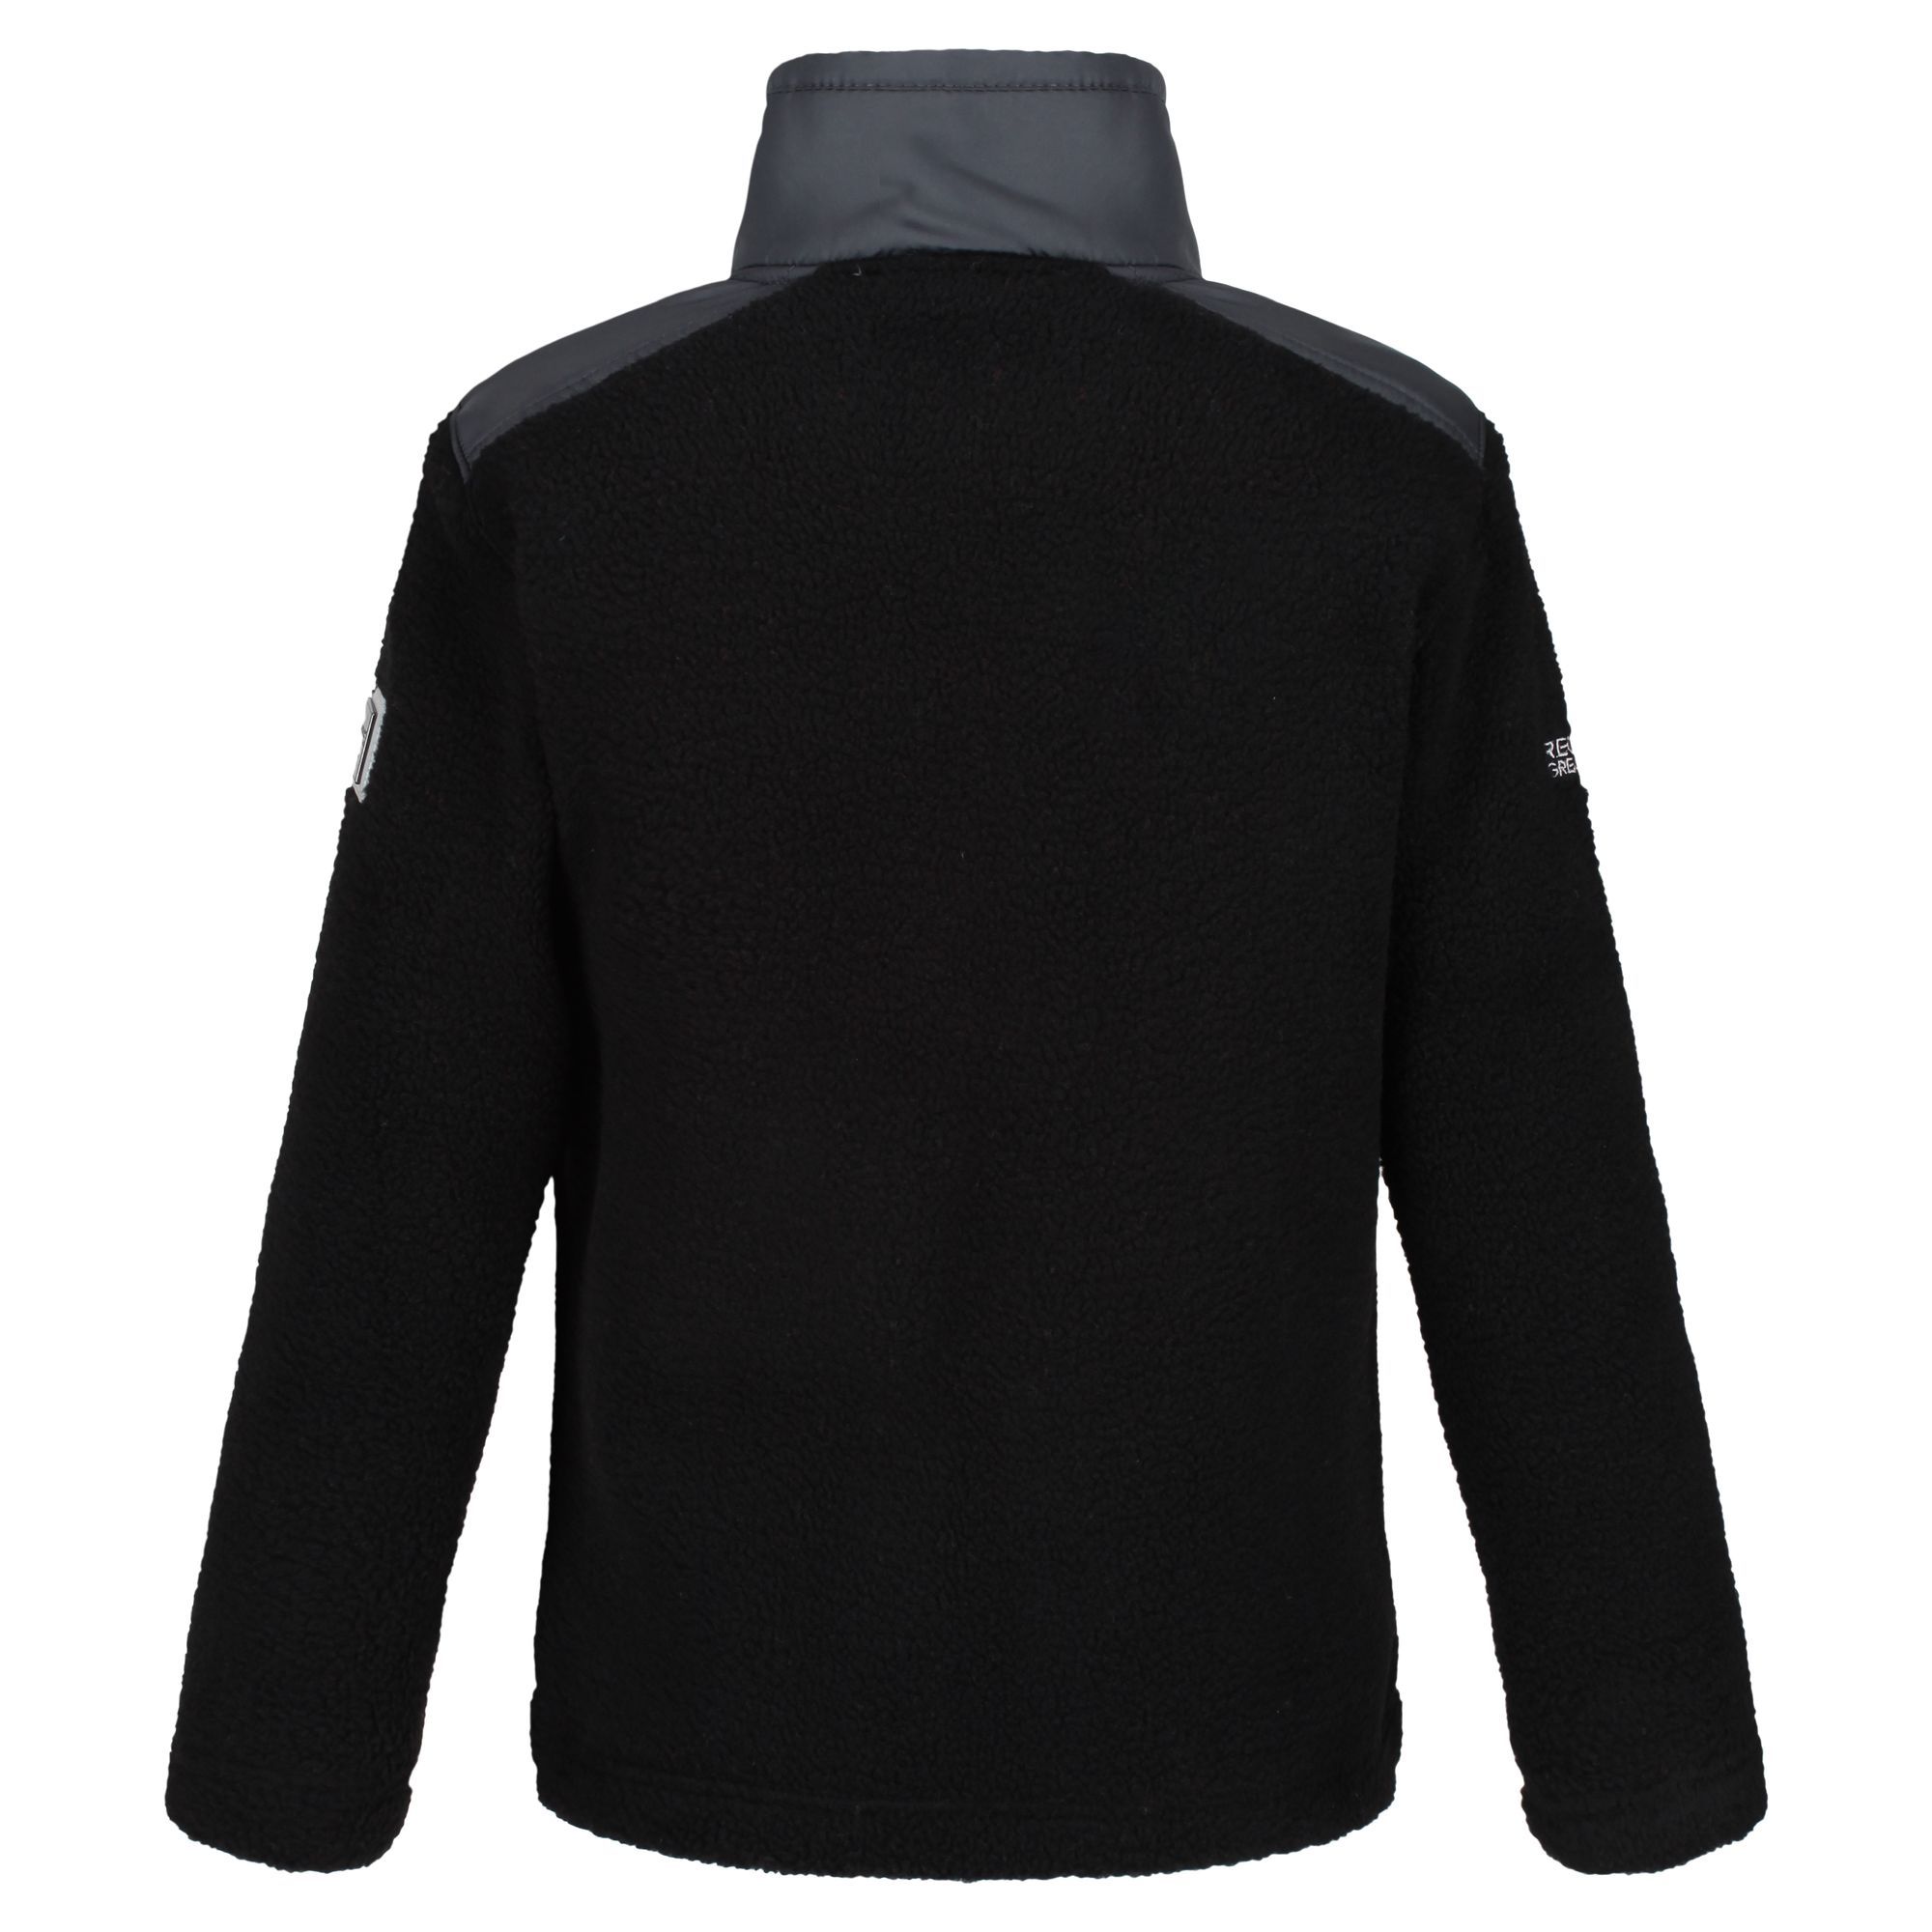 Material: 100% 350gsm polyester. Zip-through borg fleece. Provides a durable layer of warmth. With hardwearing overlays around the collar and shoulders for added durability. With the Regatta Outdoors badge on the sleeve. Features 1 zipped chest pocket and 2 zipped lower pockets. Size (height/chest): (2 Years) 92cm/53-55cm, (3-4 Years) 98-104cm/55-57cm, (5-6 Years) 110-116cm/59-61cm, (7-8 Years) 122-128cm/63-67cm, (9-10 Years) 135-140cm/69-73cm, (11-12 Years) 146-152cm/75-79cm, (13 Years) 153-158cm/82cm, (14 Years) 164-170cm/86cm, (15-16 Years) 170-176cm/89-92cm.